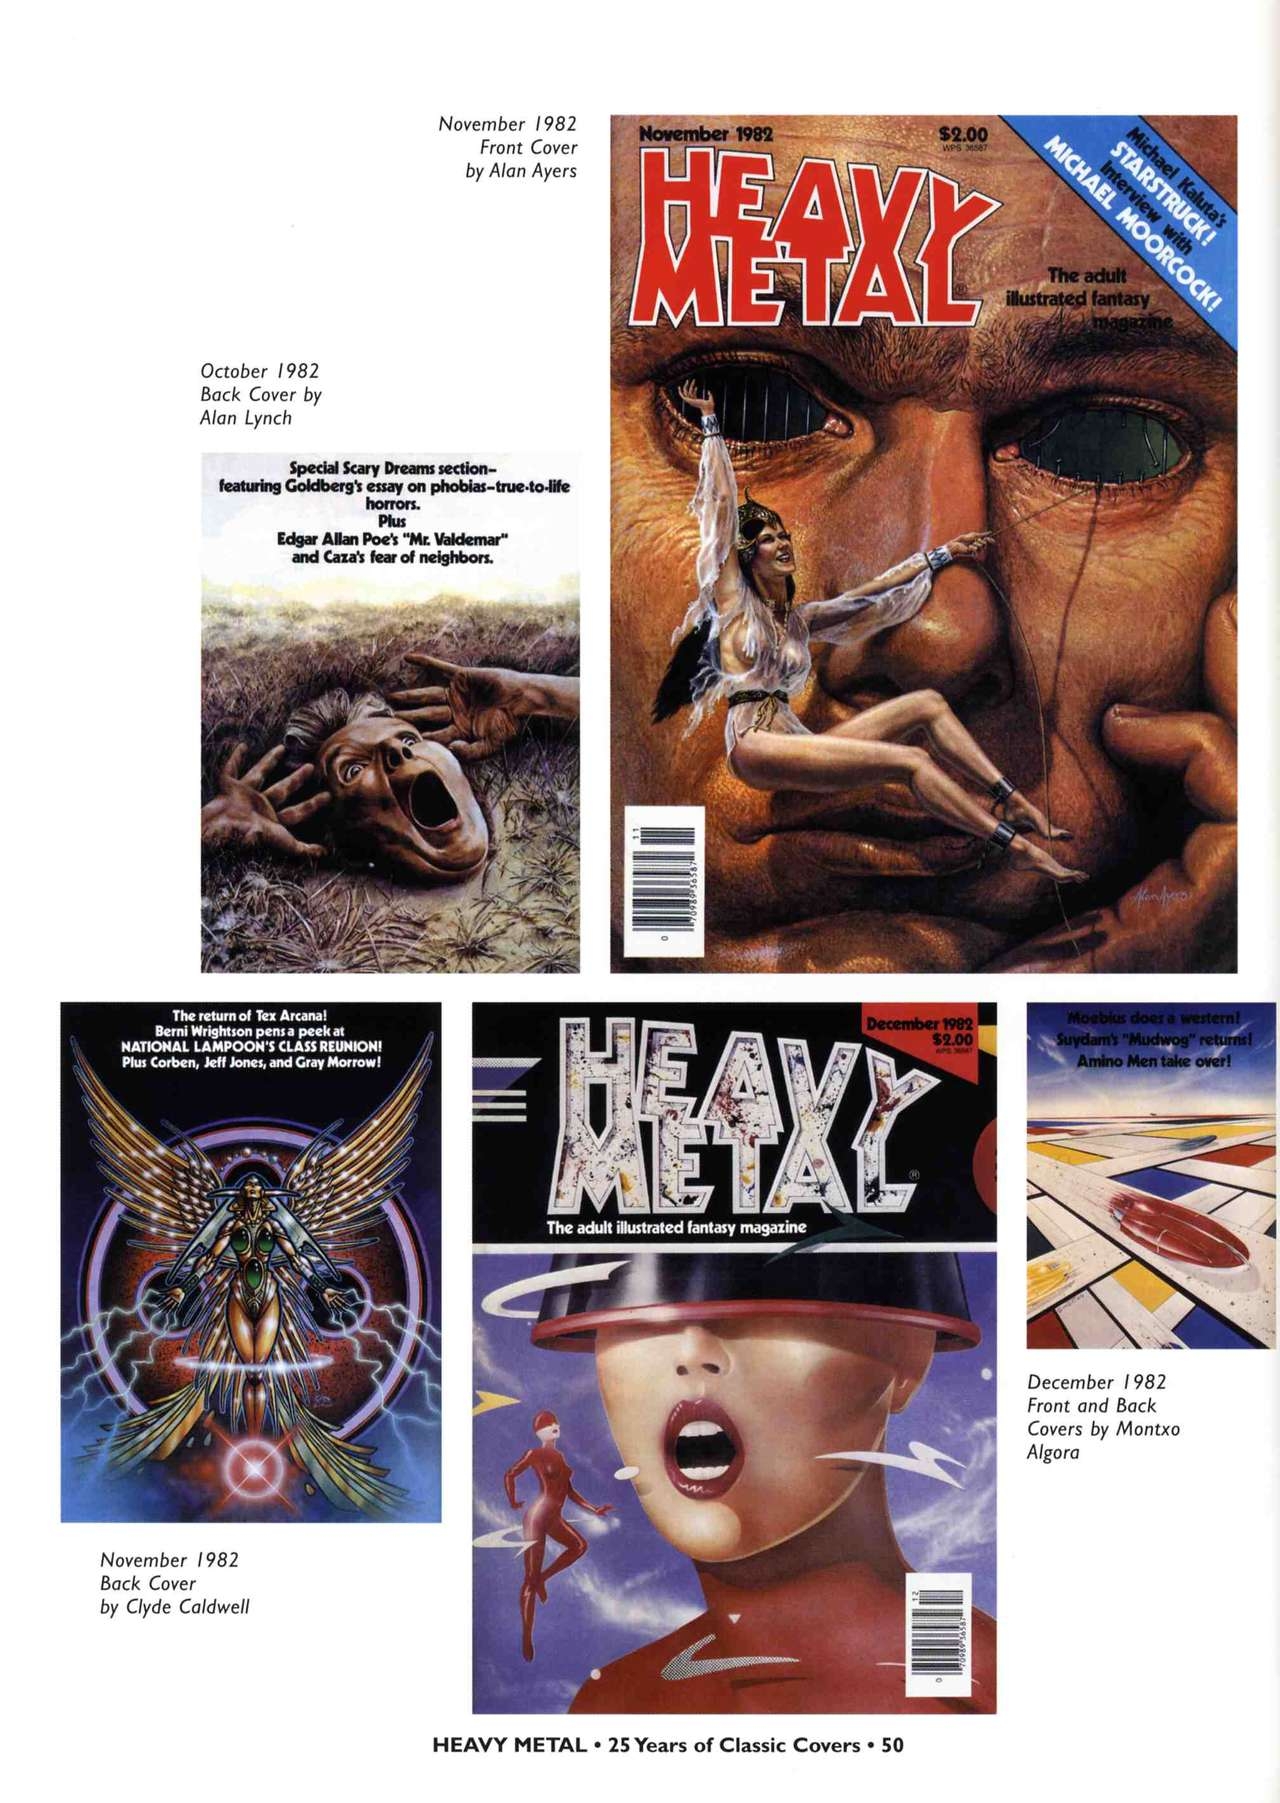 HEAVY METAL 25 Years of Classic Covers 55